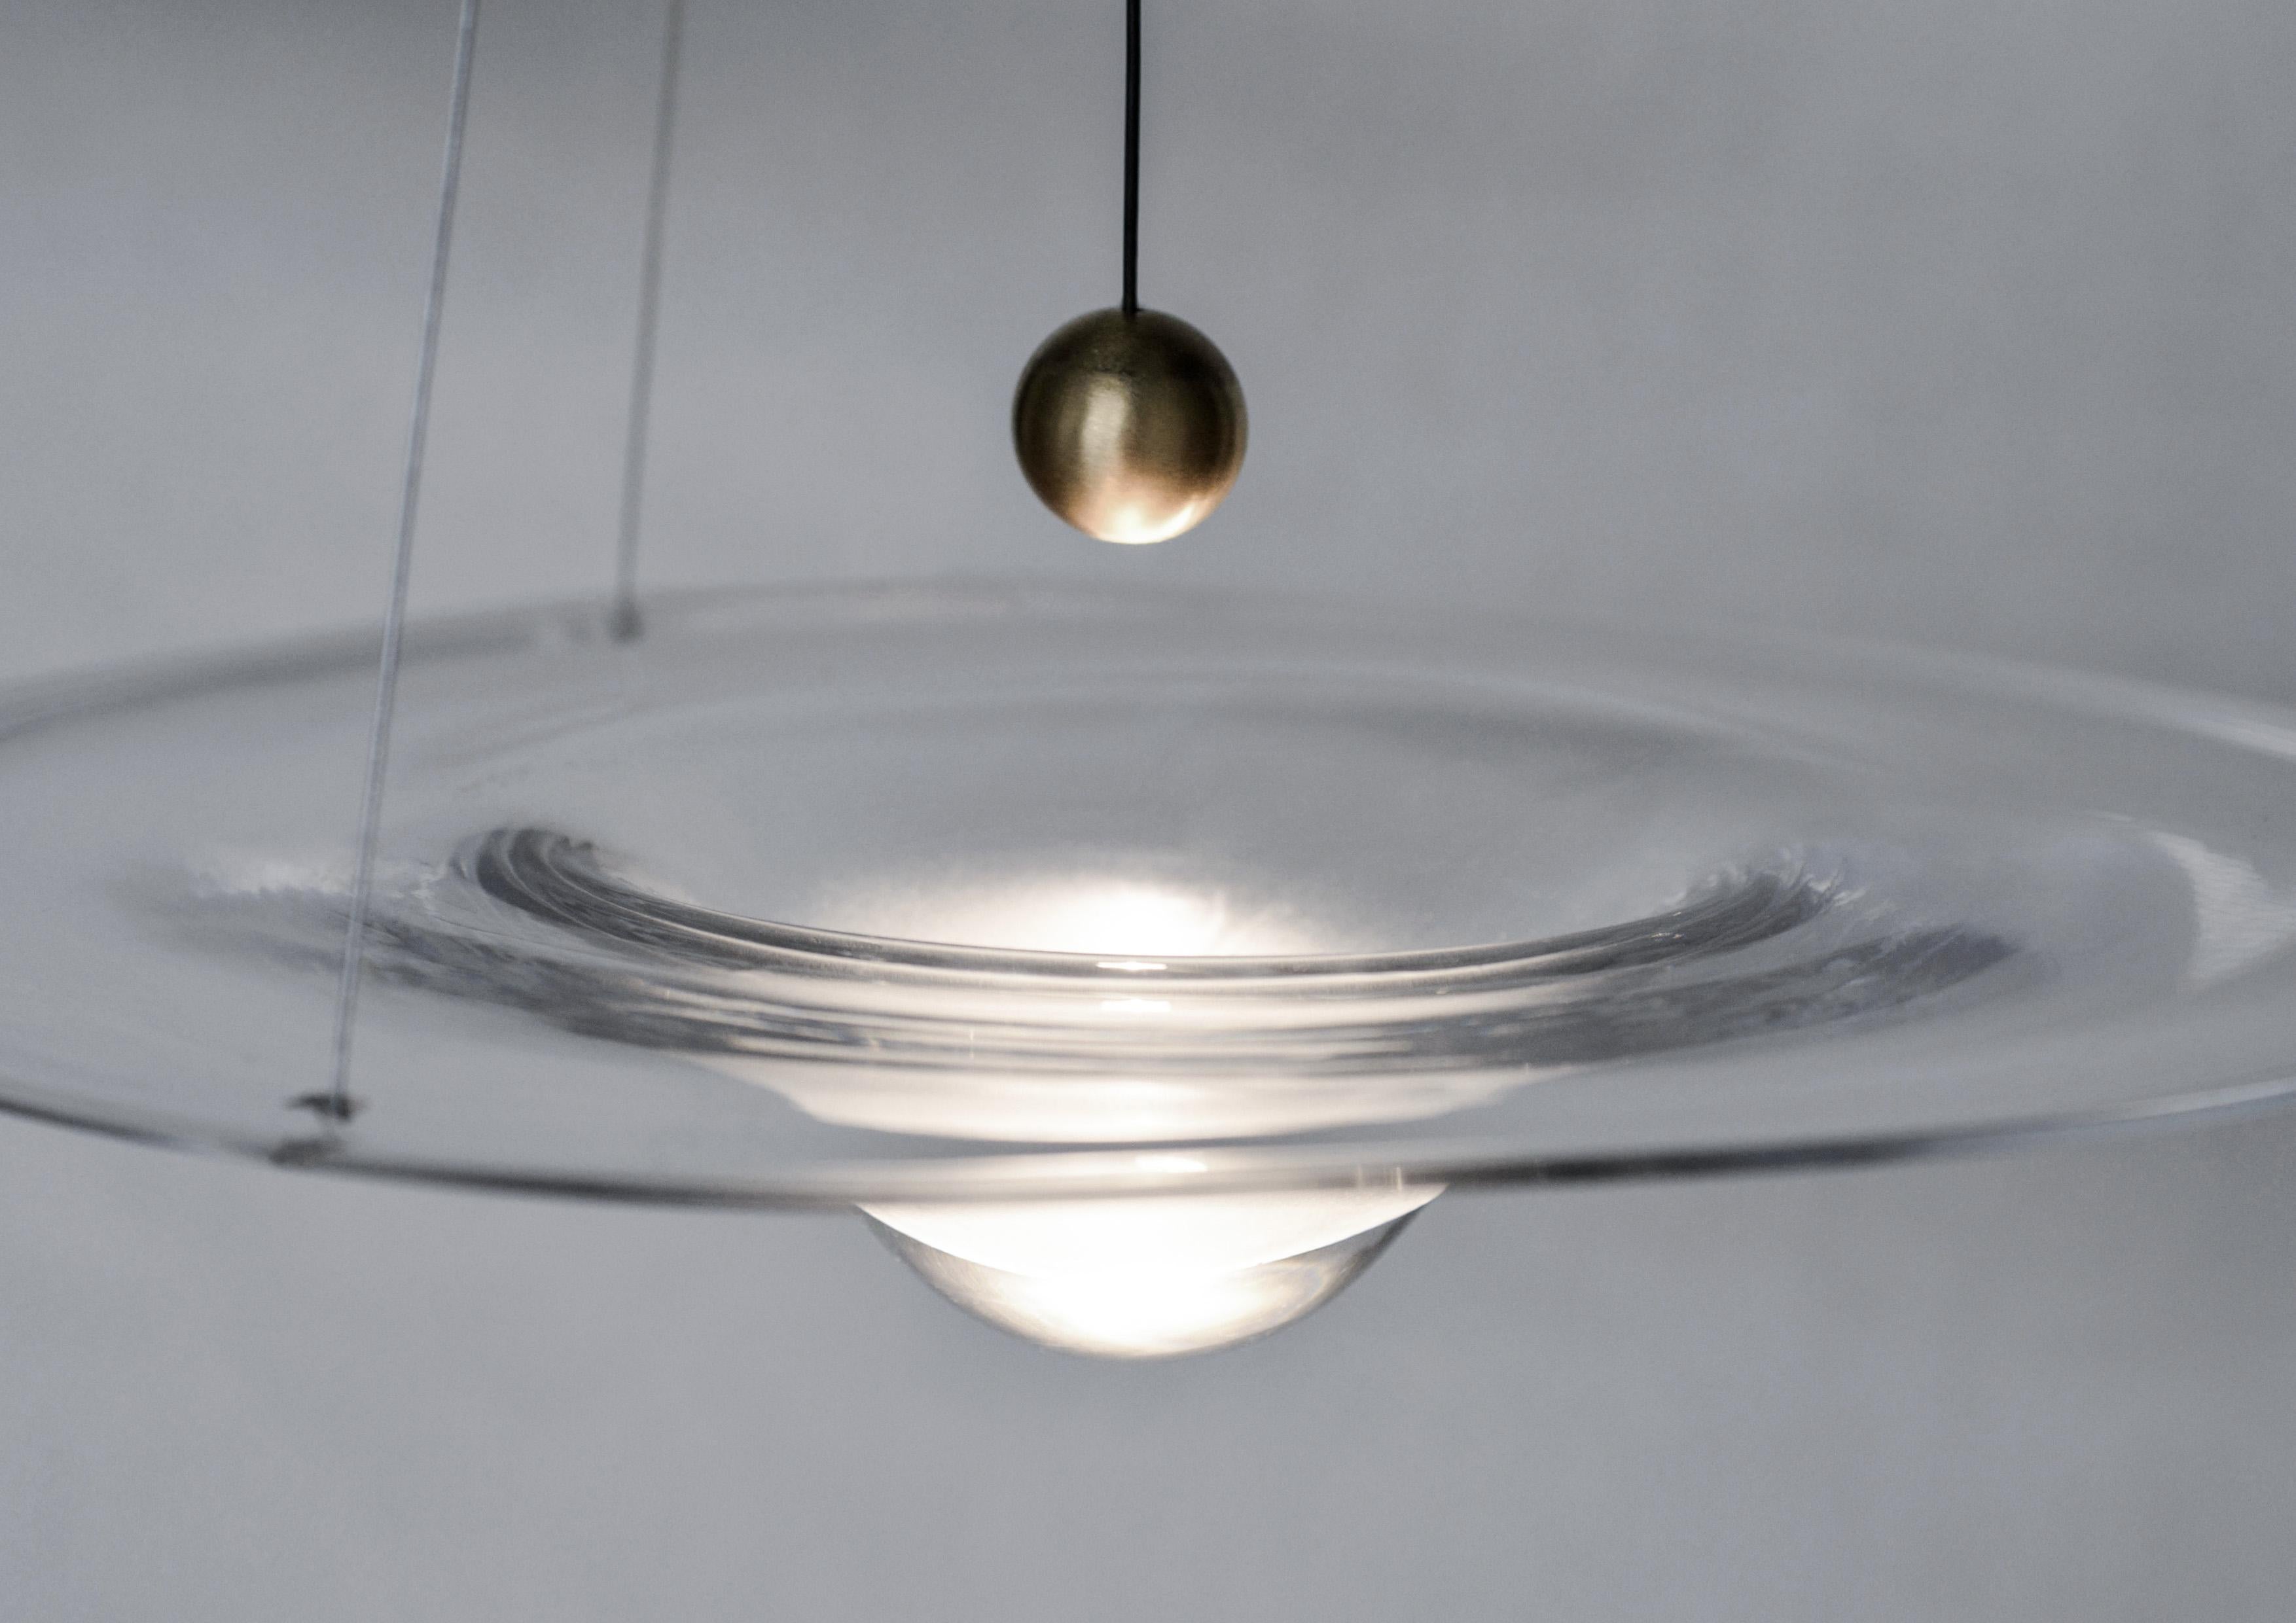 There is a moment when a clinging bead of water, in quiet orb-like suspension, becomes a droplet. The droplet reflects its surroundings while gathering light within.? There is a moment when molten glass transforms from liquid to solid.? This instant